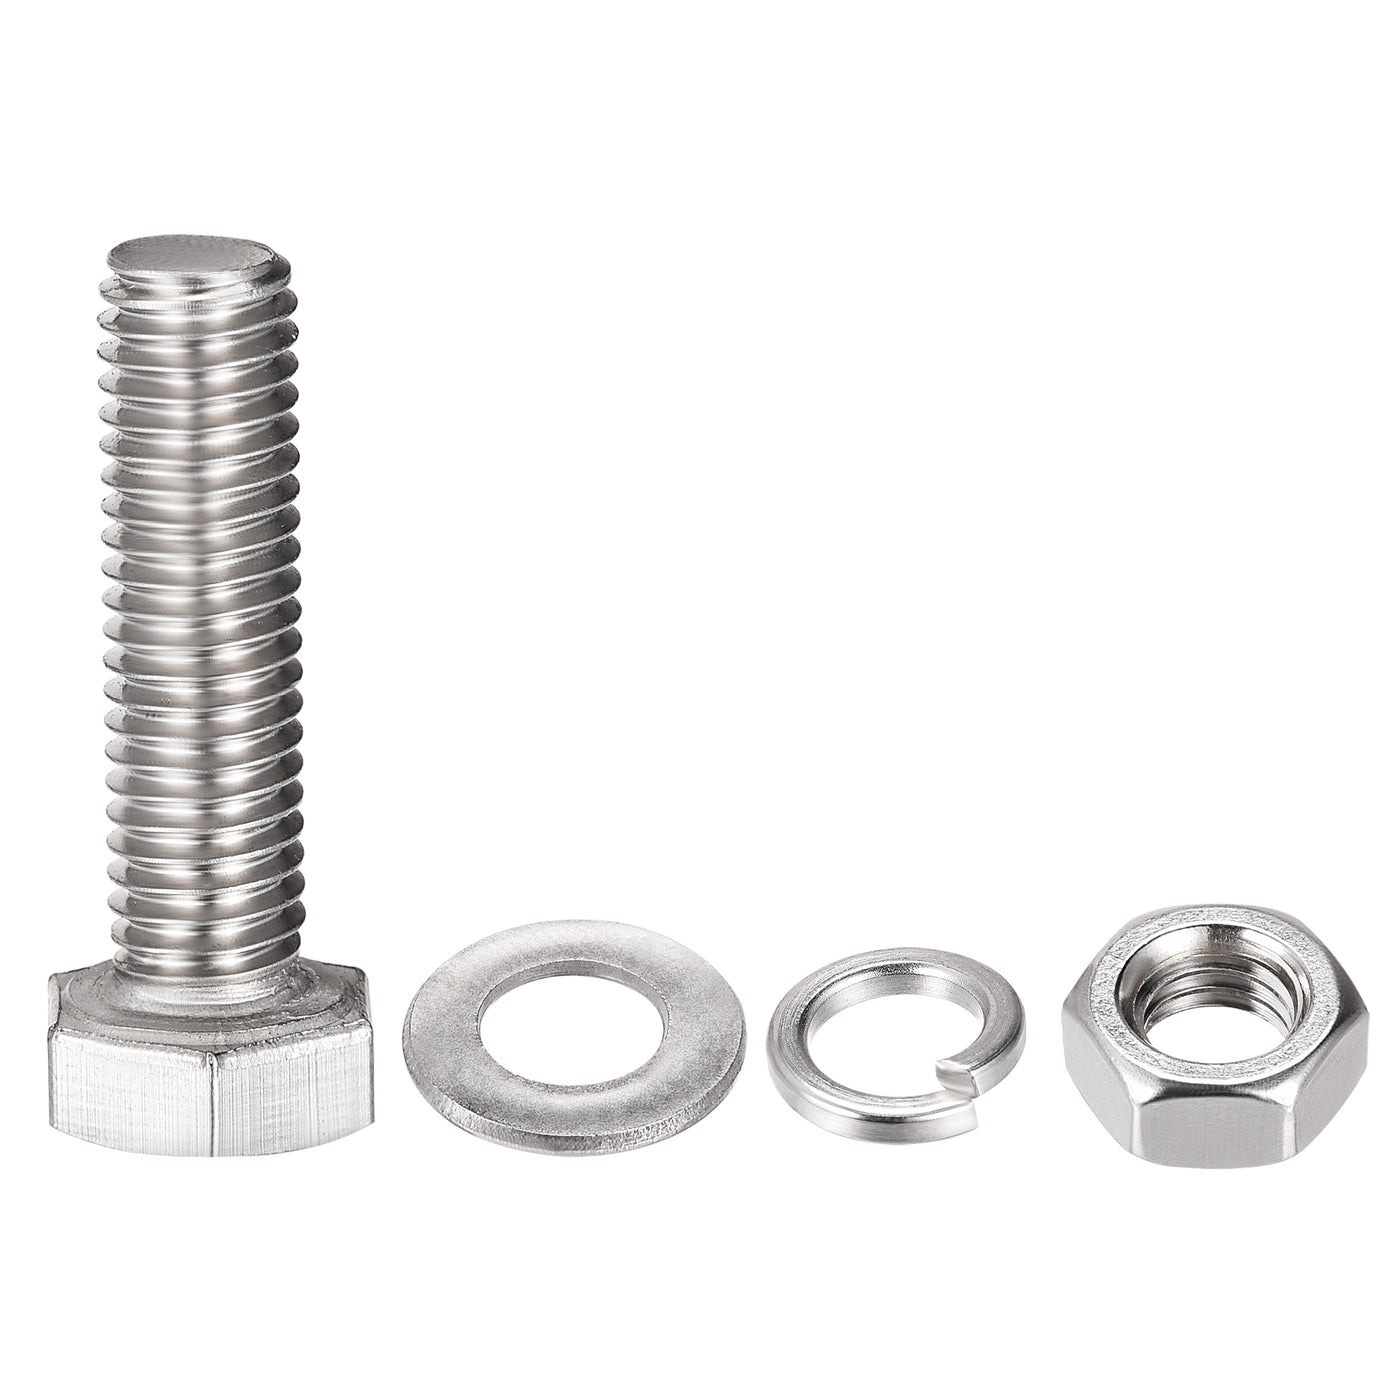 uxcell Uxcell Hex Head Screws Bolts, Nuts, Flat & Lock Washers Kits, 304 Stainless Steel Fully Thread Hexagon Bolts 4 Set